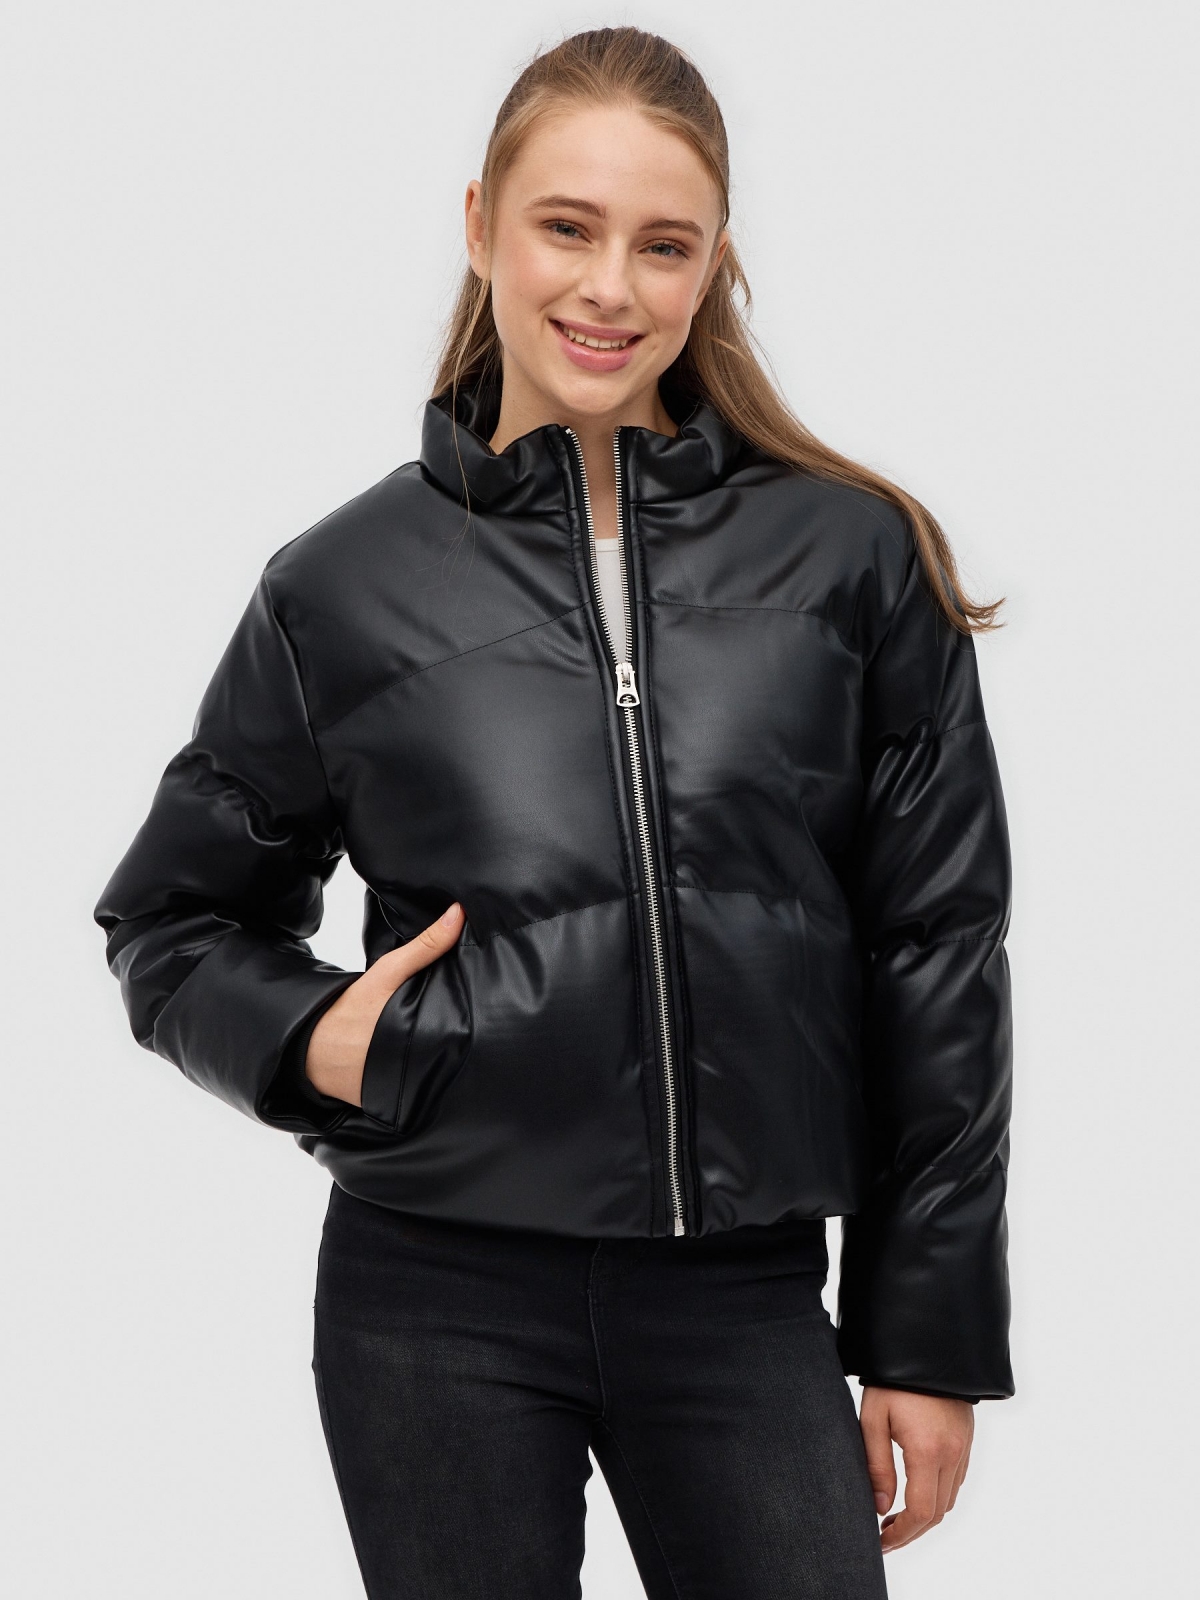 Quilted leatherette jacket black middle front view